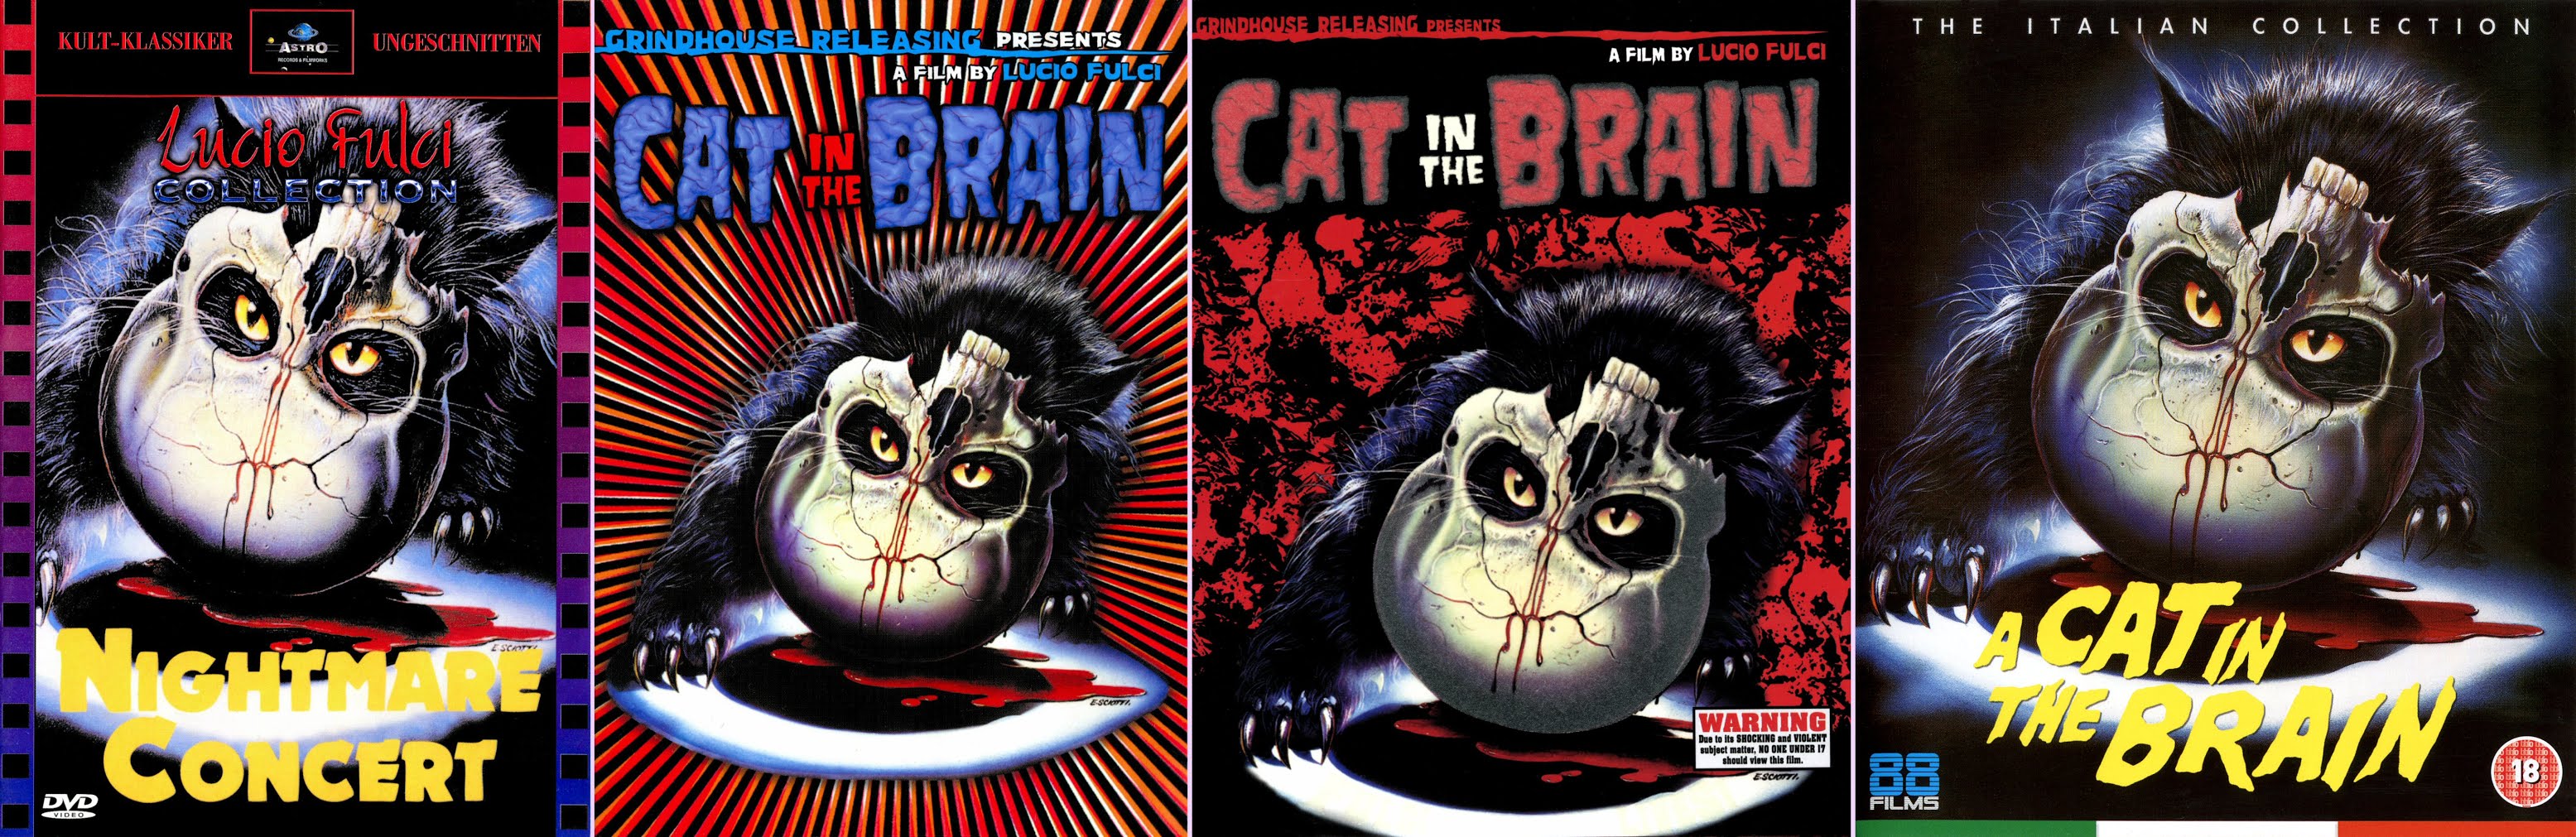 DVD Exotica: The More Cat In the Brains, The Merrier! (DVD/ Blu-ray  Comparison)